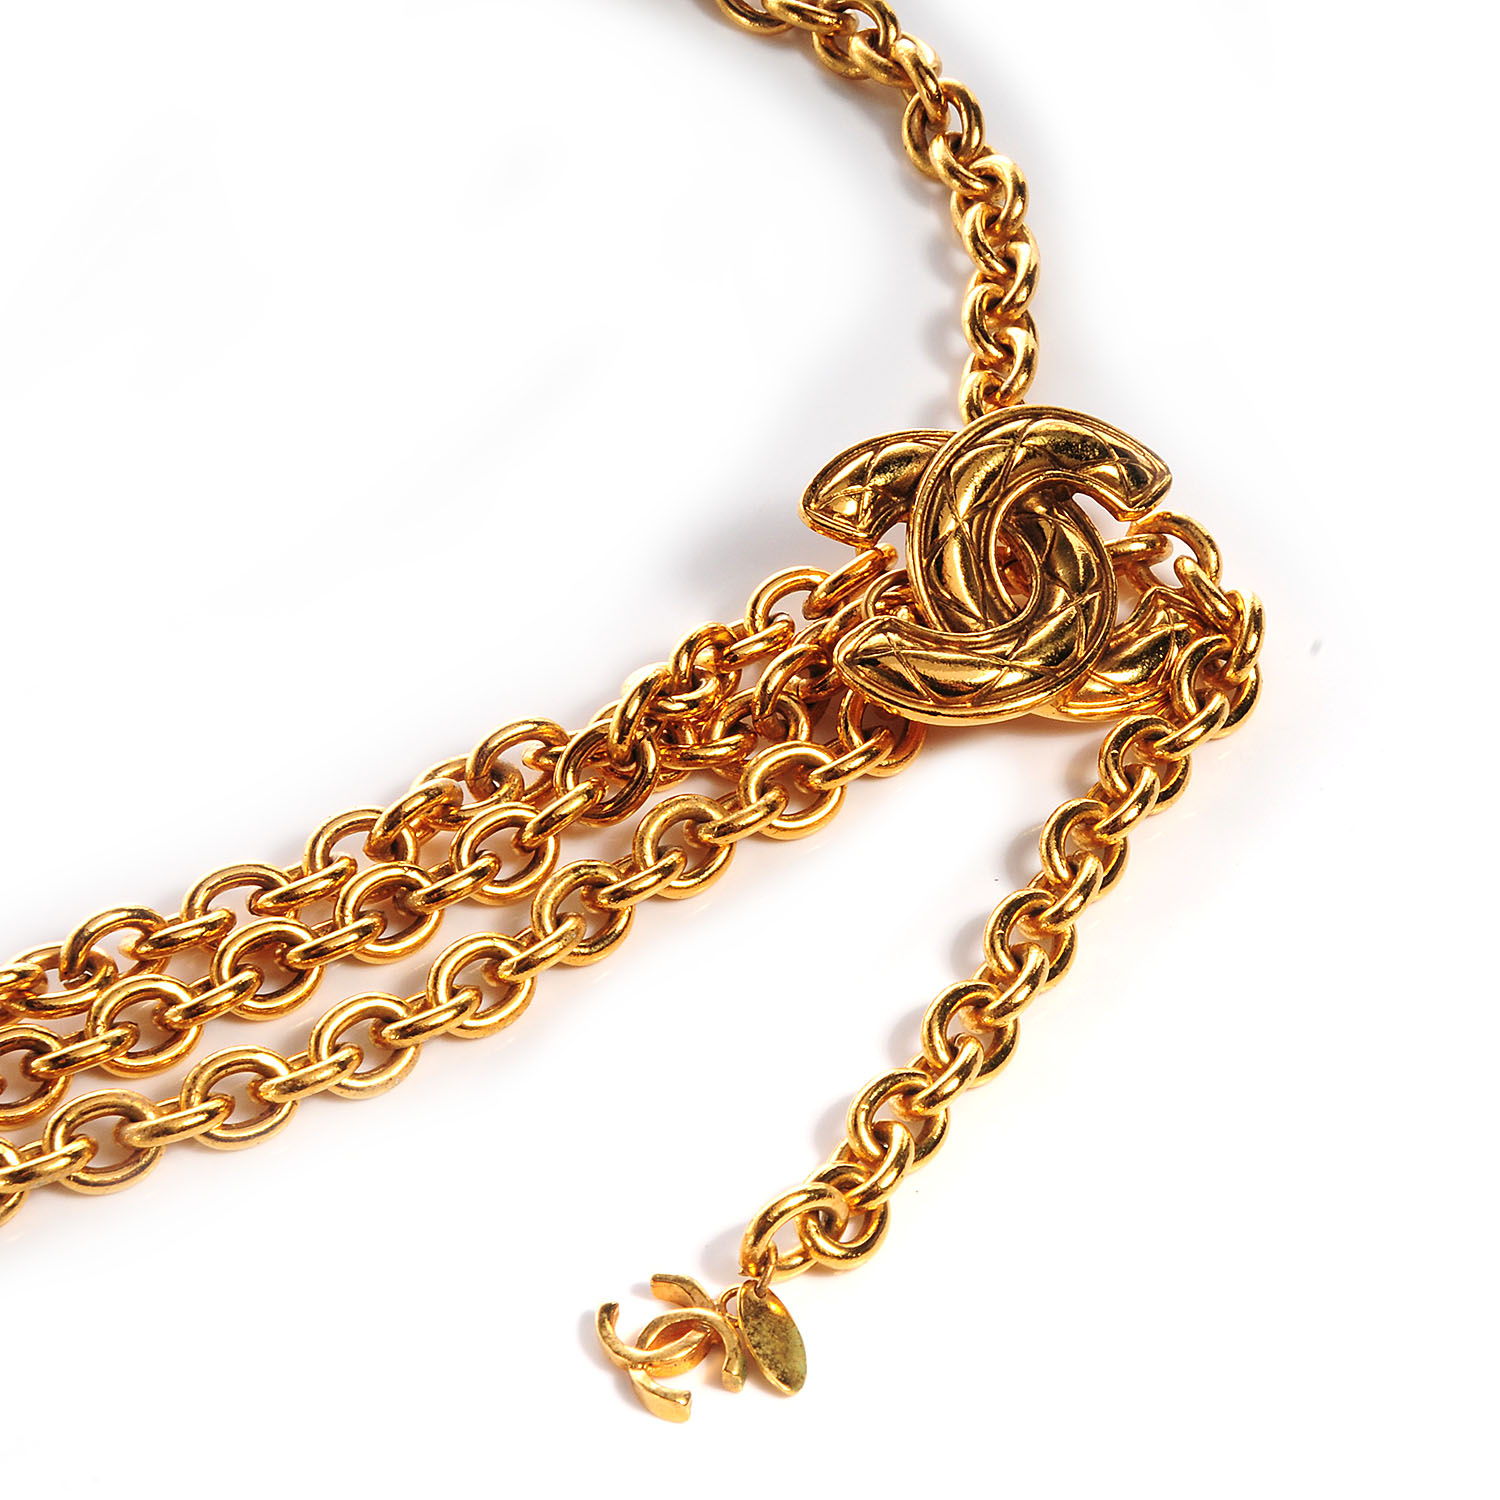 CHANEL Quilted CC Chain Belt Gold 67427